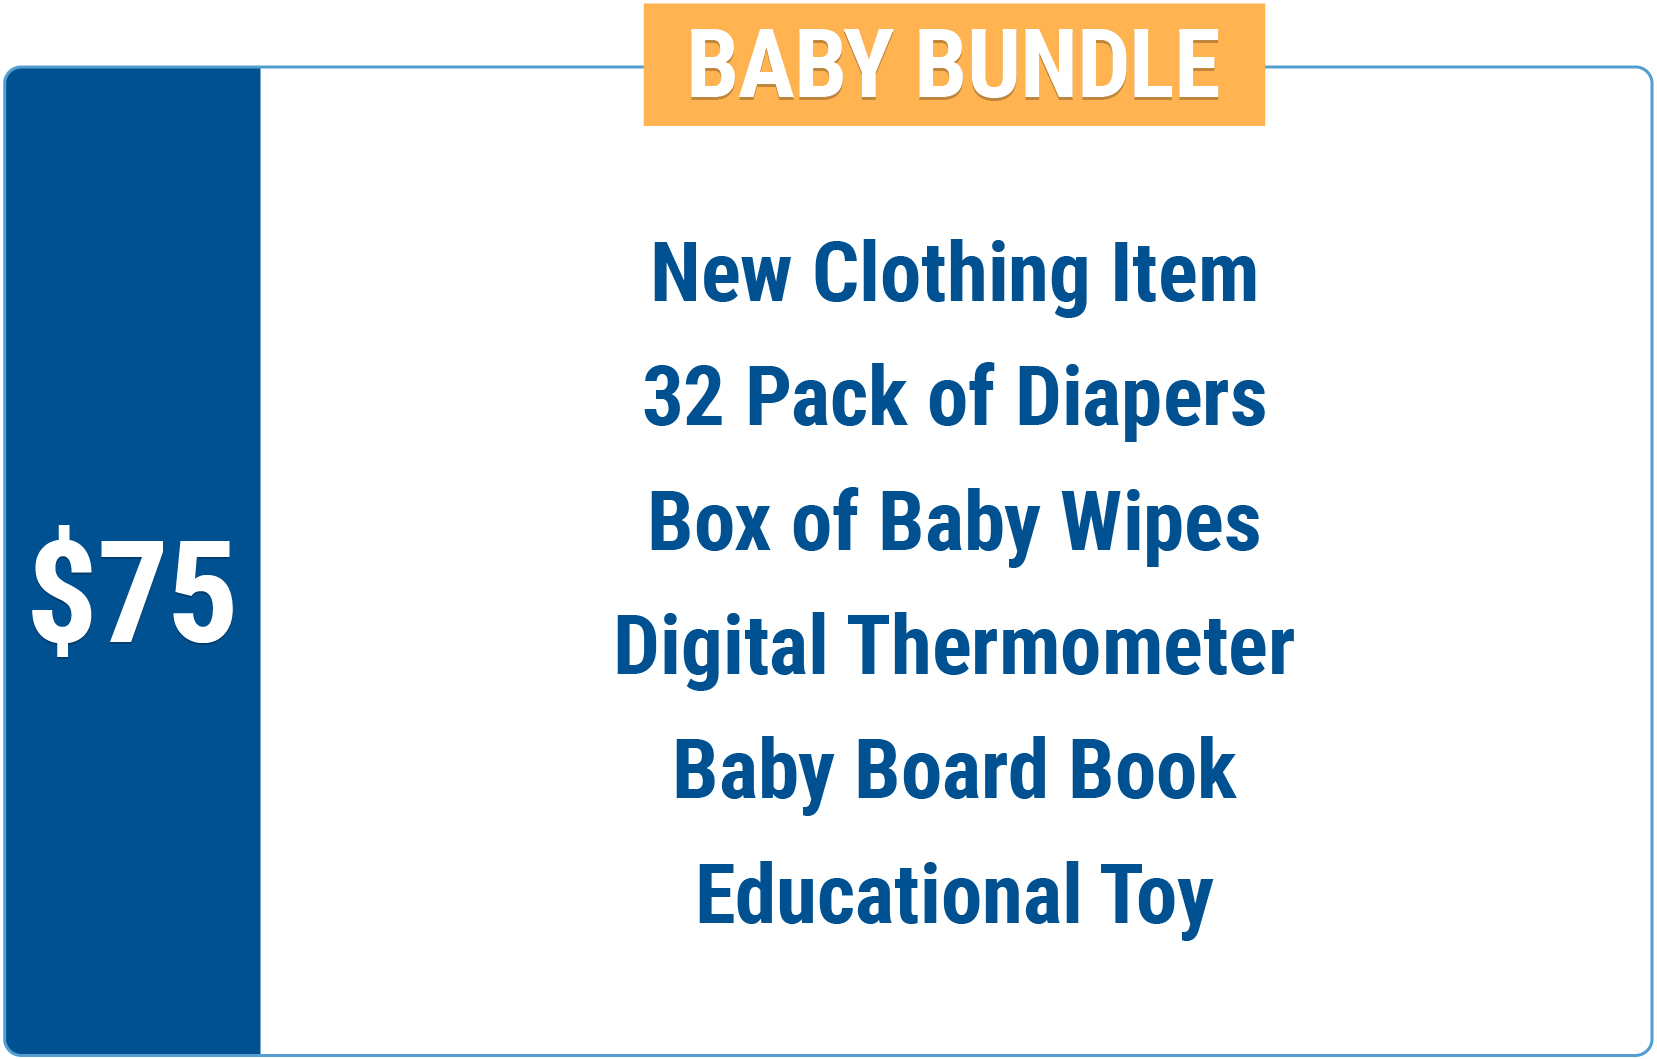 75 dollars donation equals new clothing item, 32 pack diapers, box of baby wipes, digital thermometer, baby board book, educational toy.